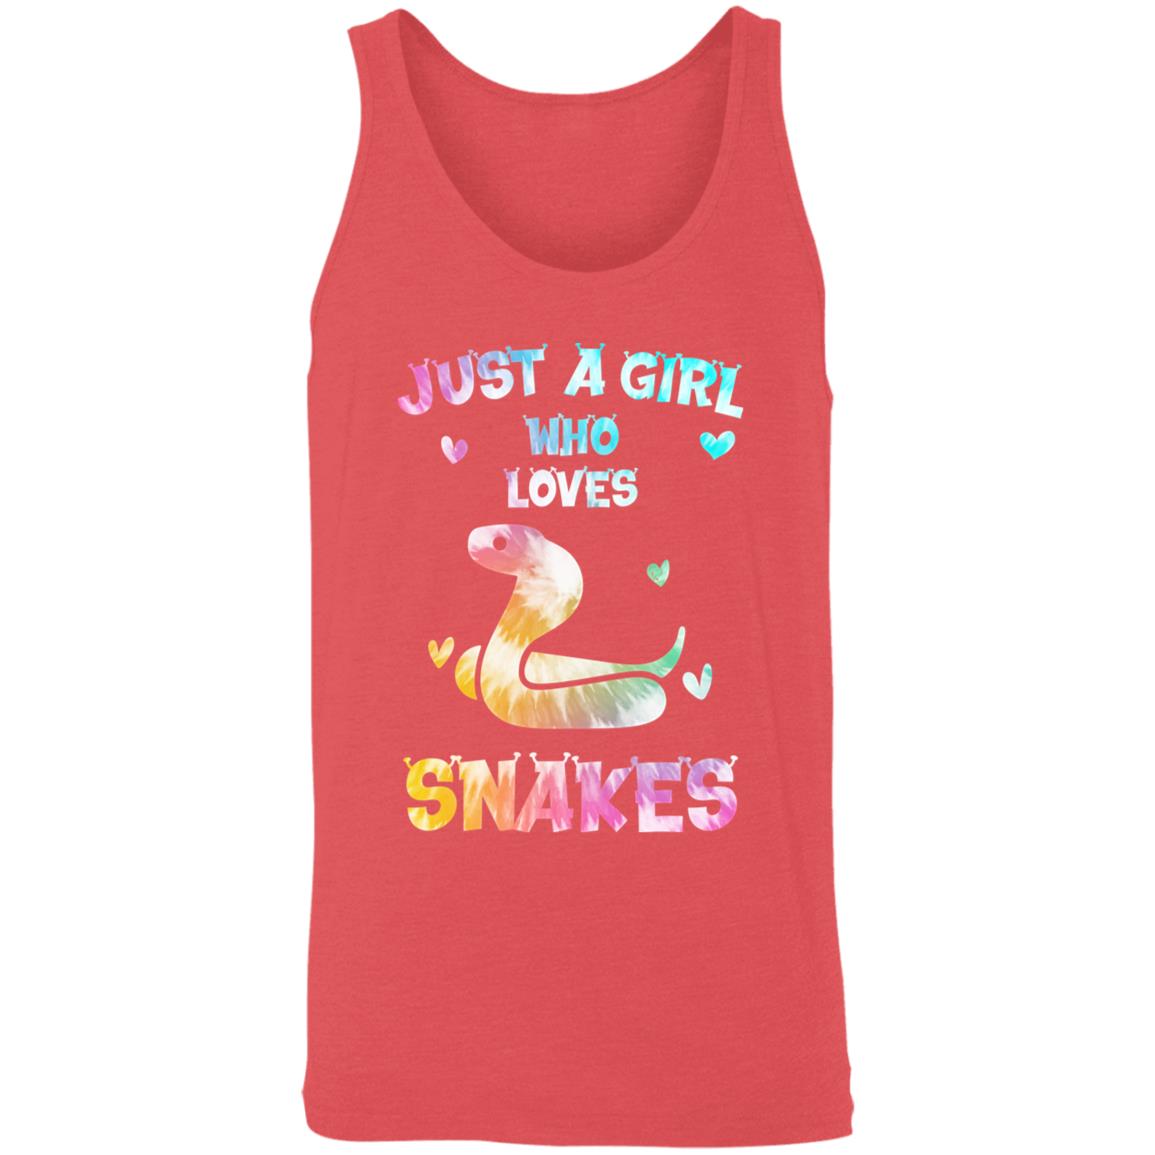 Just A Girl Who Loves Snakes - Unisex Tank Top